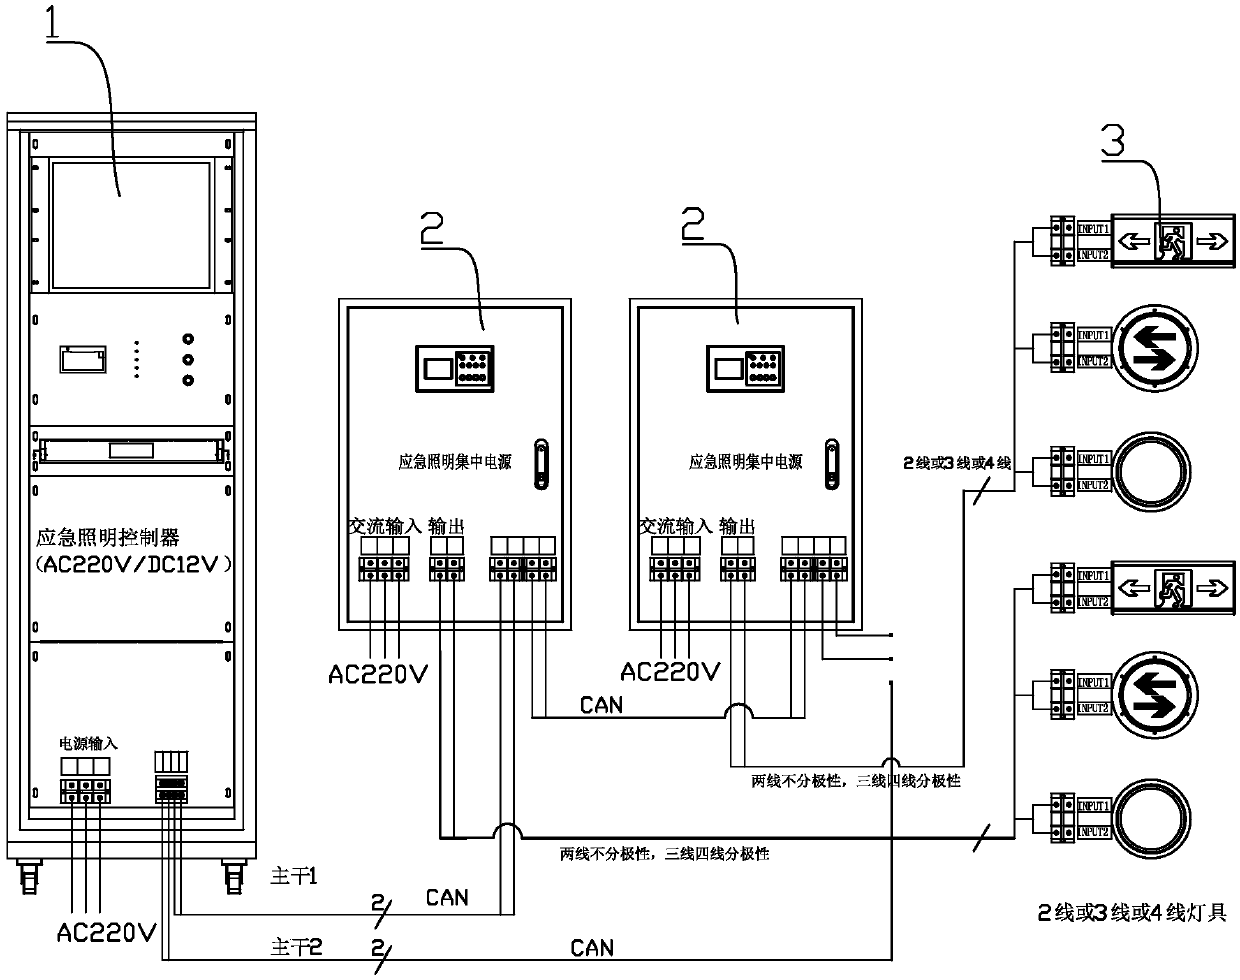 Control assembly of emergency lighting centralized power supplies